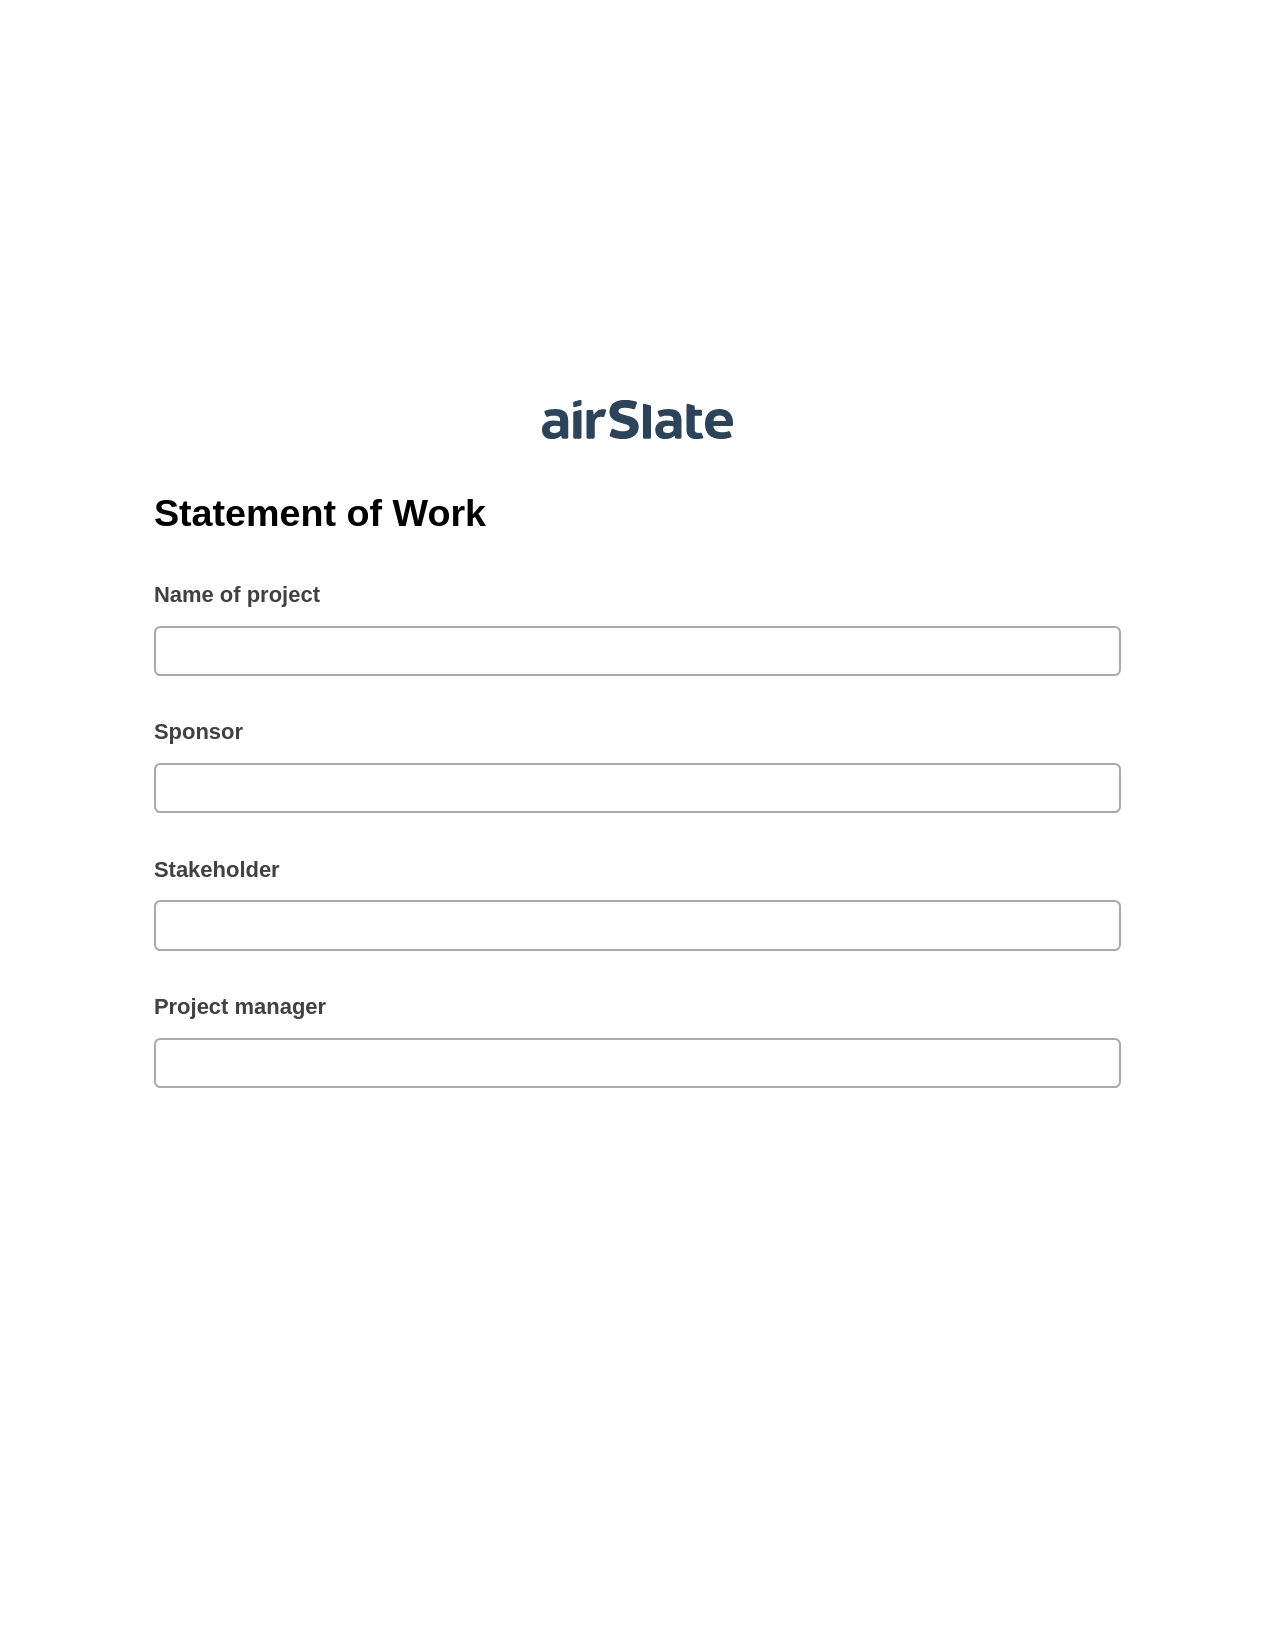 Statement of Work Pre-fill from another Slate Bot, Assign Slate Name Bot, Export to Formstack Documents Bot